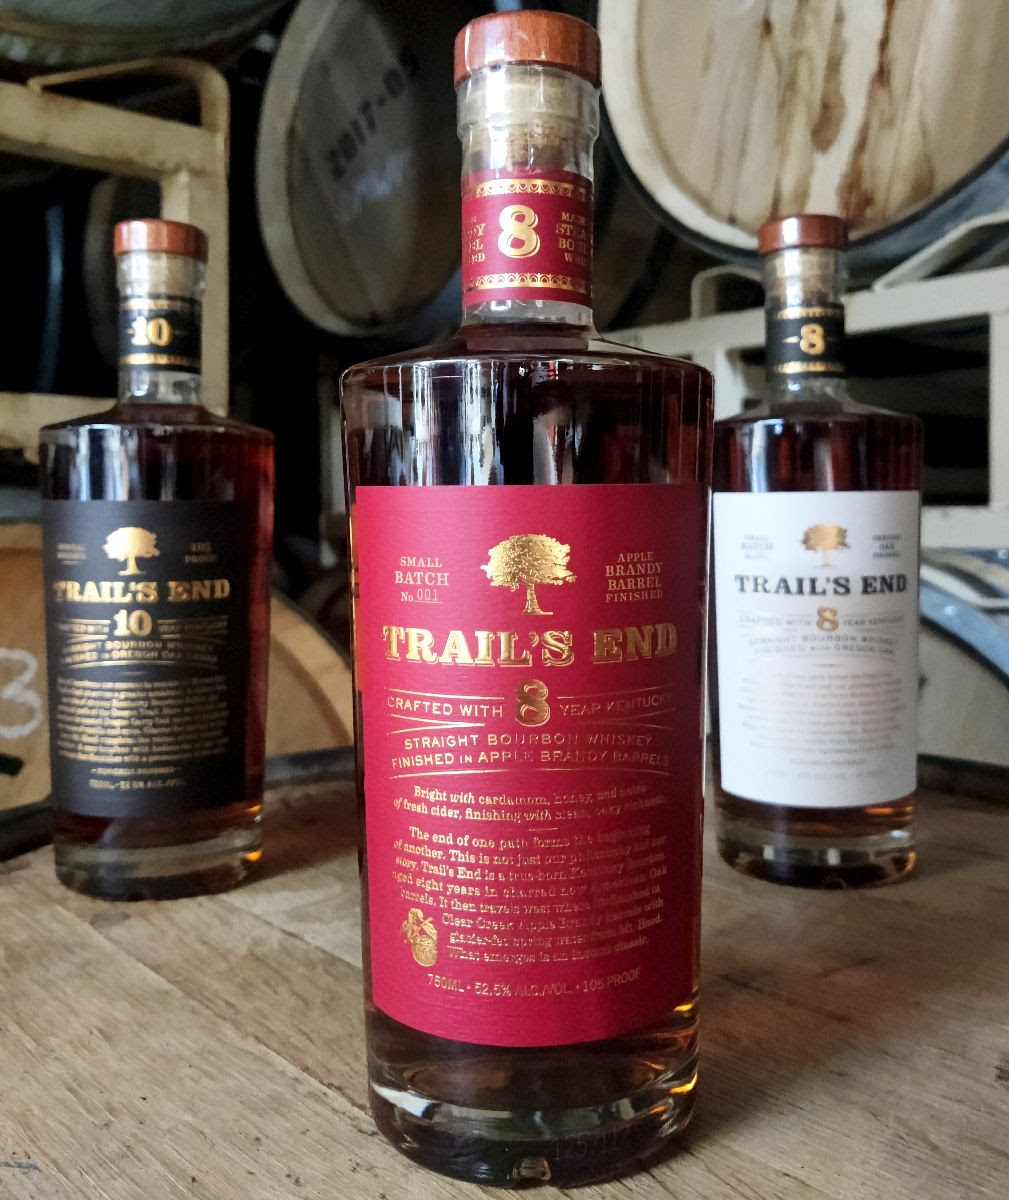 Trail’s End 8 Year Kentucky Straight Bourbon Whiskey Finished in Apple Brandy Barrels joins Trail’s End 8 Year Kentucky Straight Bourbon Whiskey and Trail’s End 10 Year Kentucky Straight Bourbon Whiskey. (image courtesy of Hood River Distillers)